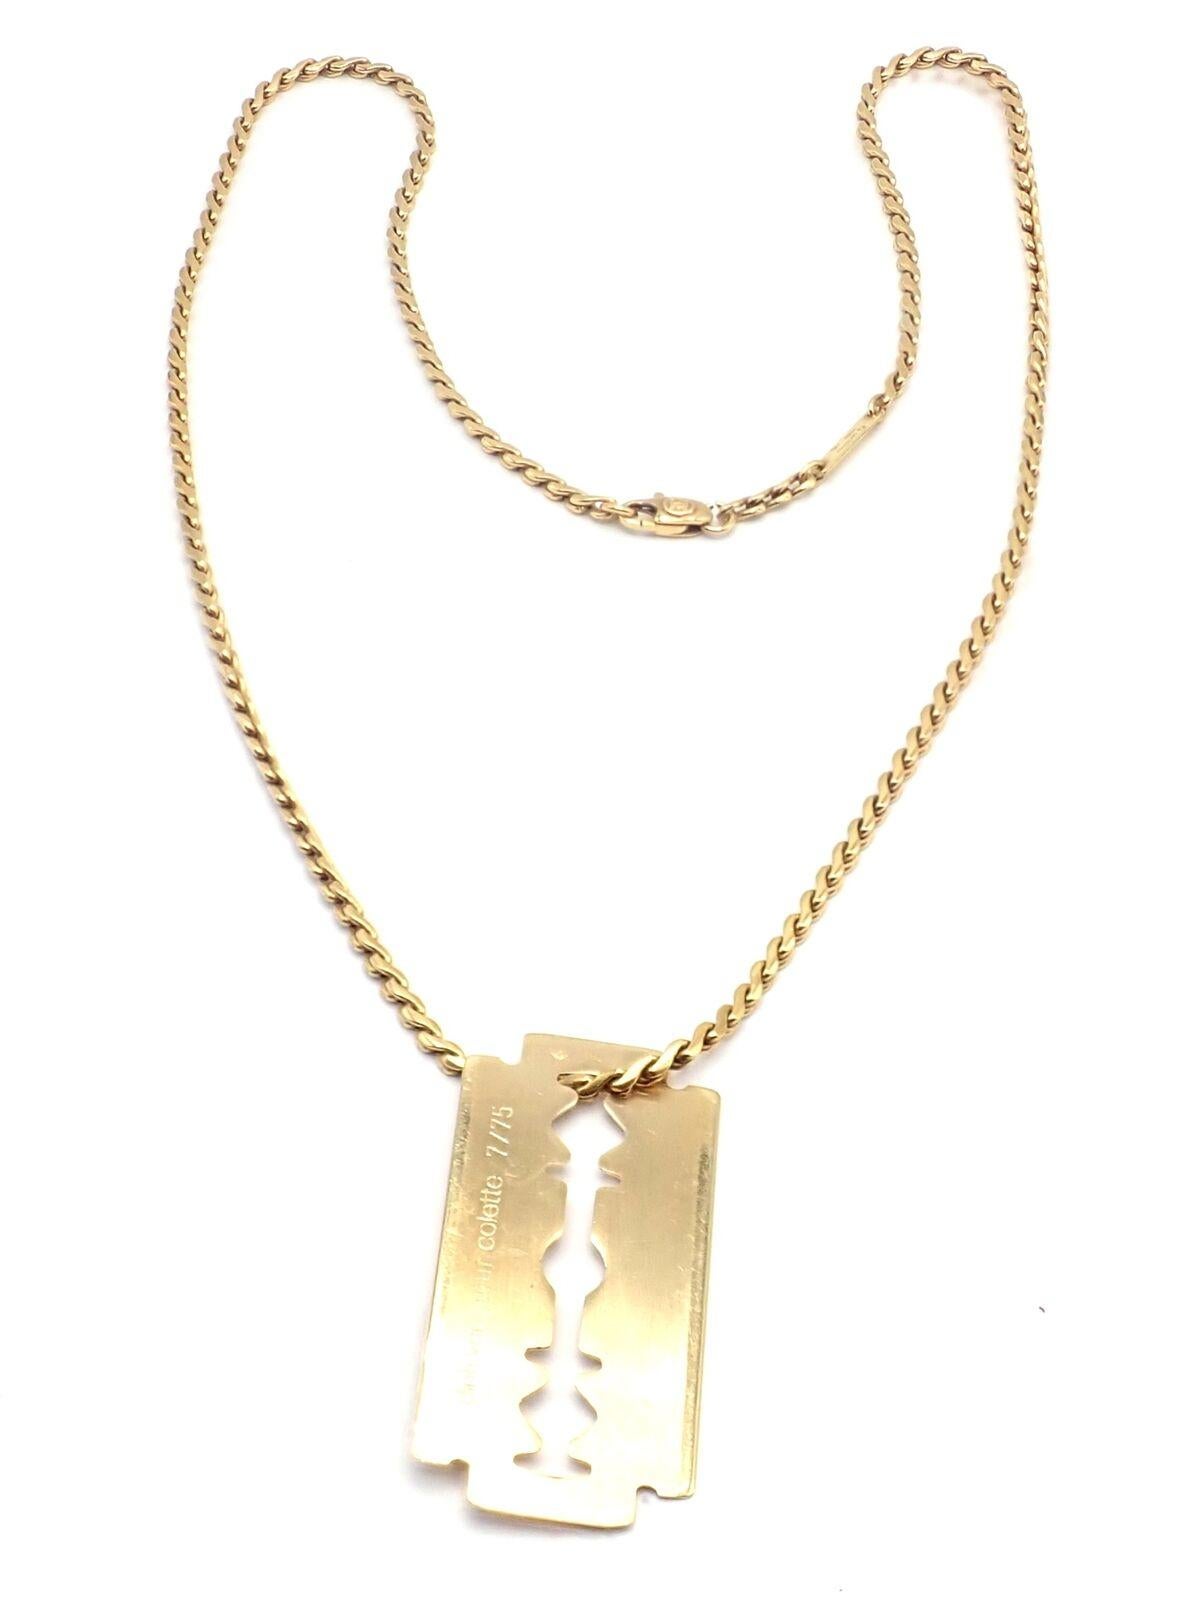 Vintage Dinh Van Cartier Razor Blade Yellow Gold Pendant Chain Necklace In Excellent Condition For Sale In Holland, PA